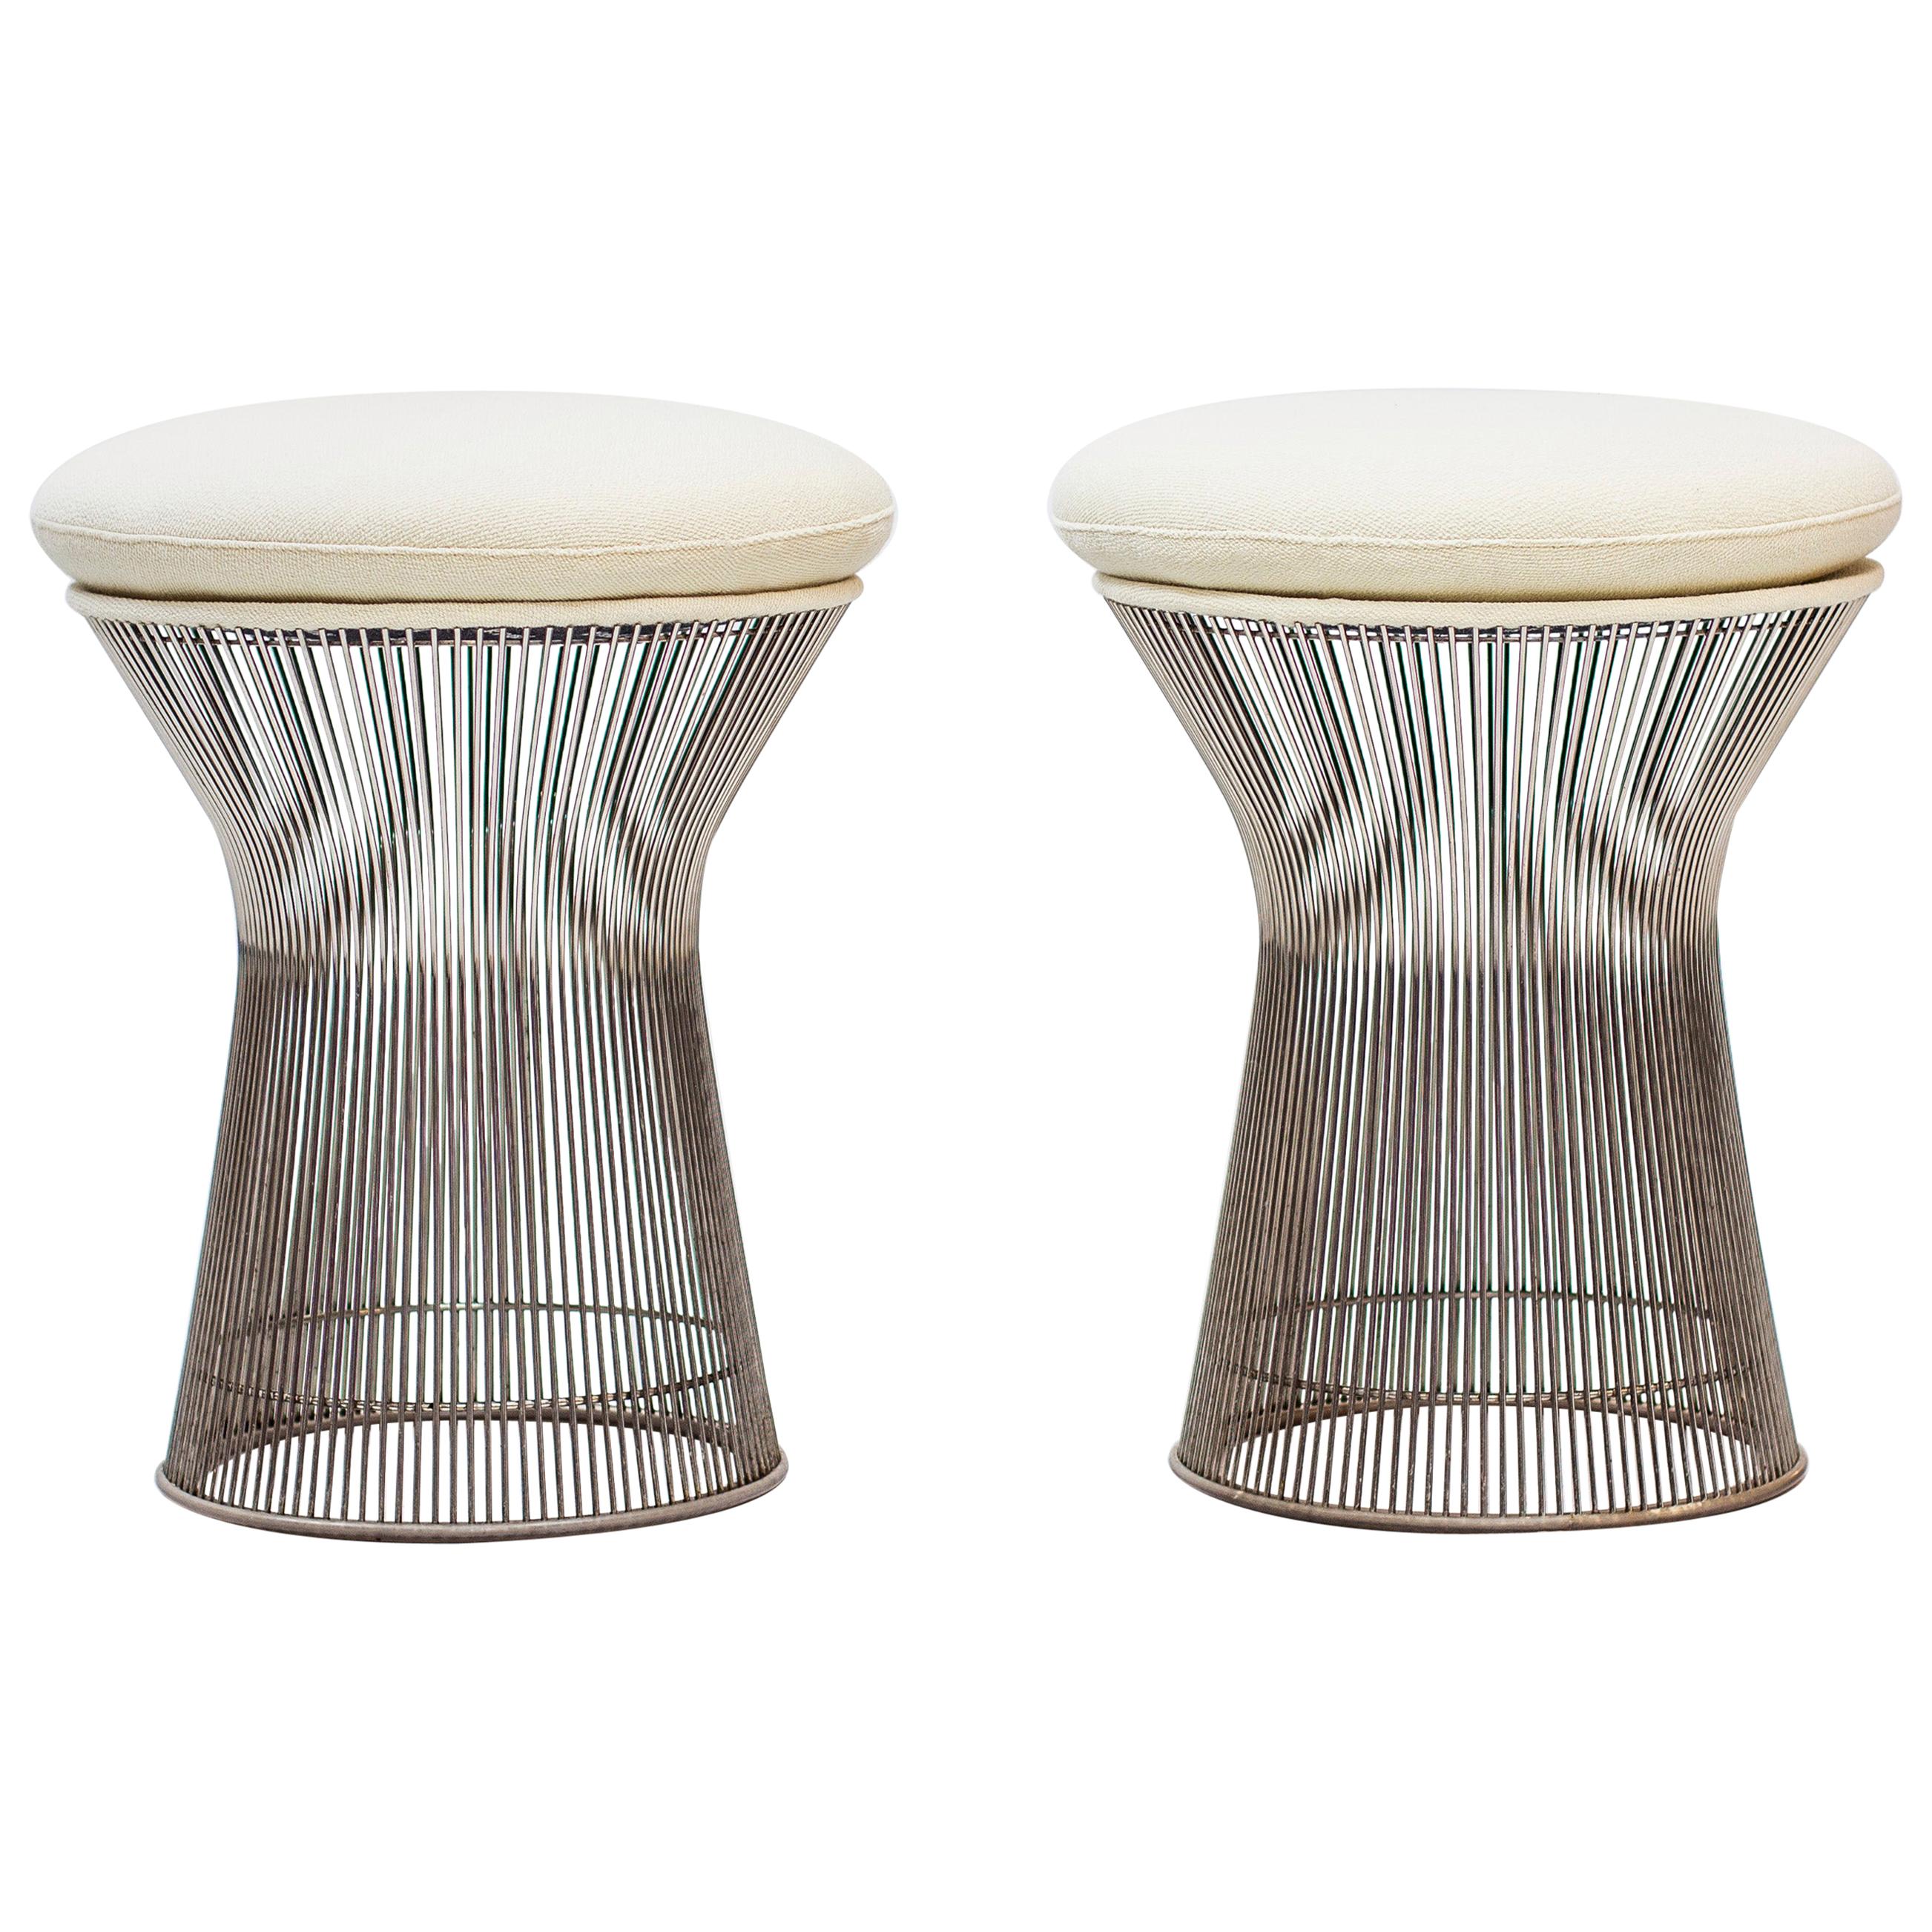 Pair of Wire Stools by Warren Platner for Knoll